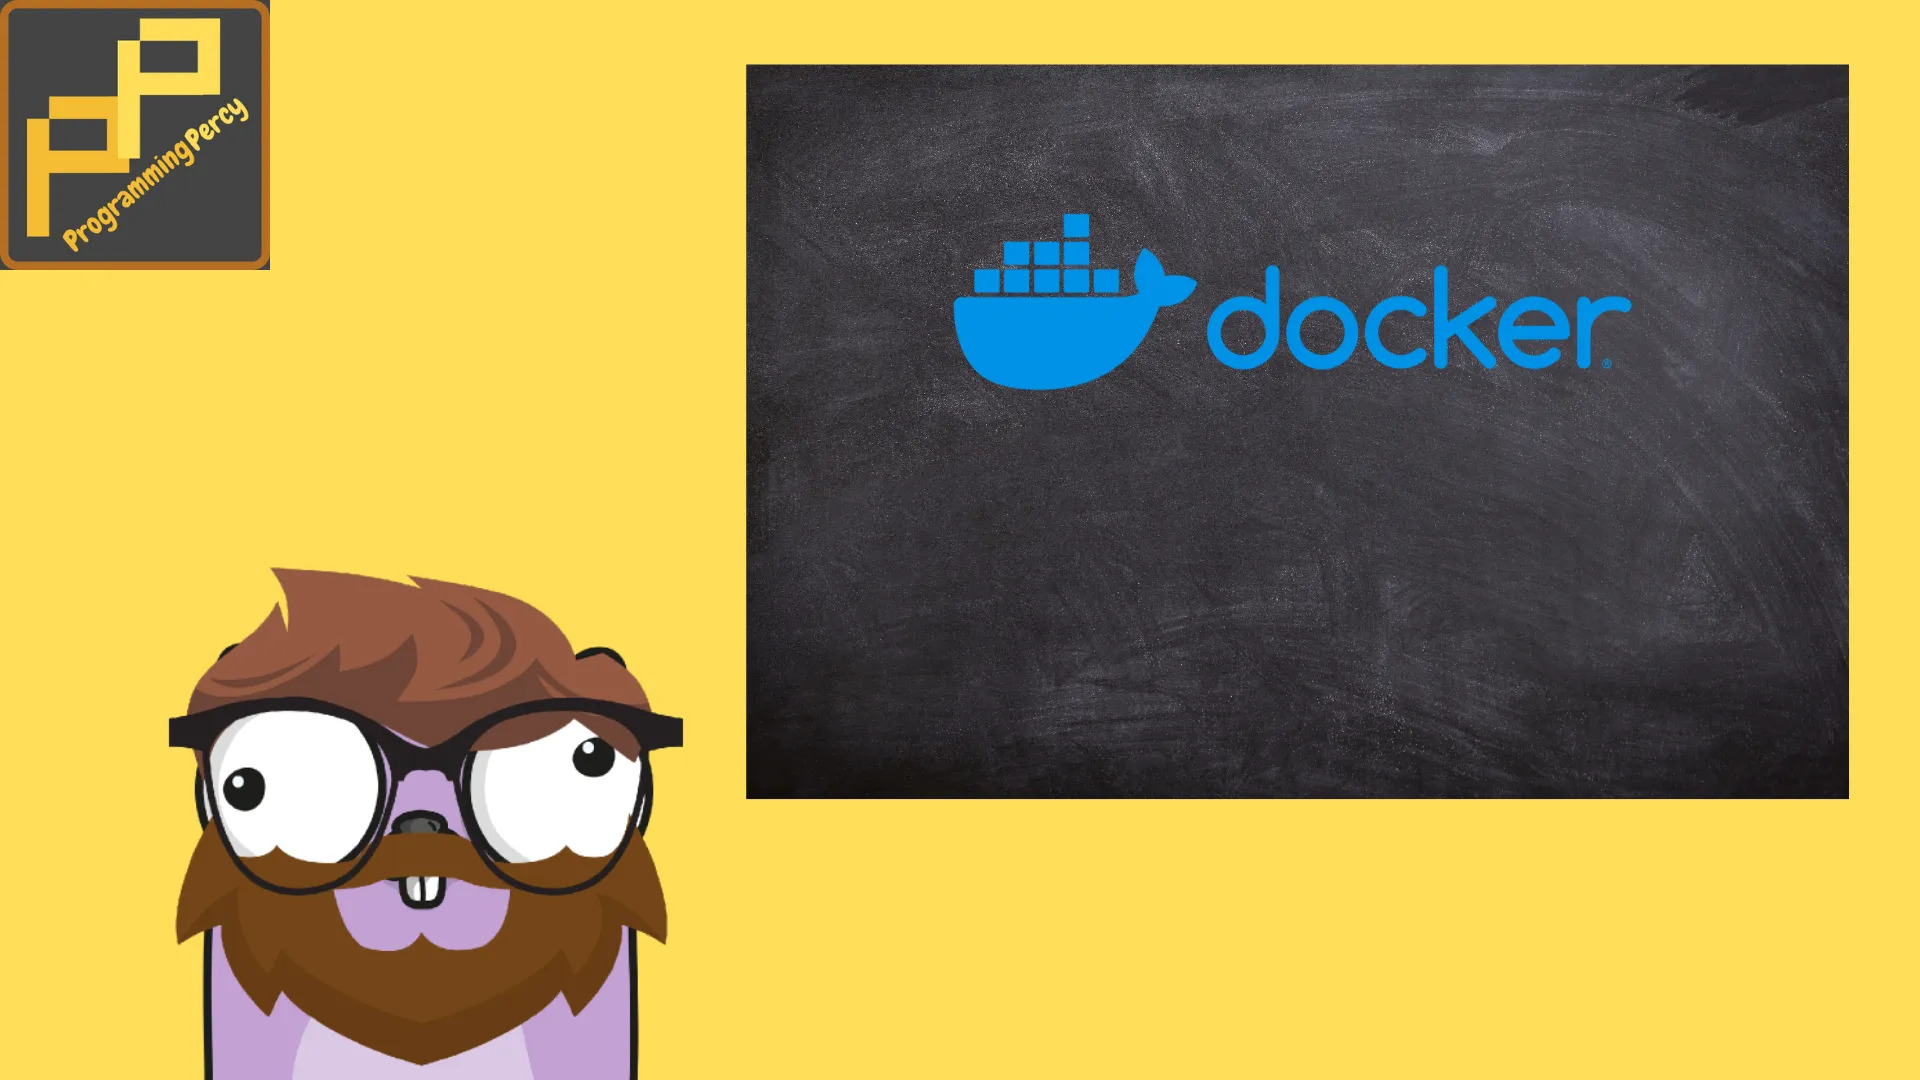 A tutorial which covers the basics of Docker and teaches you how to containerize your applications.